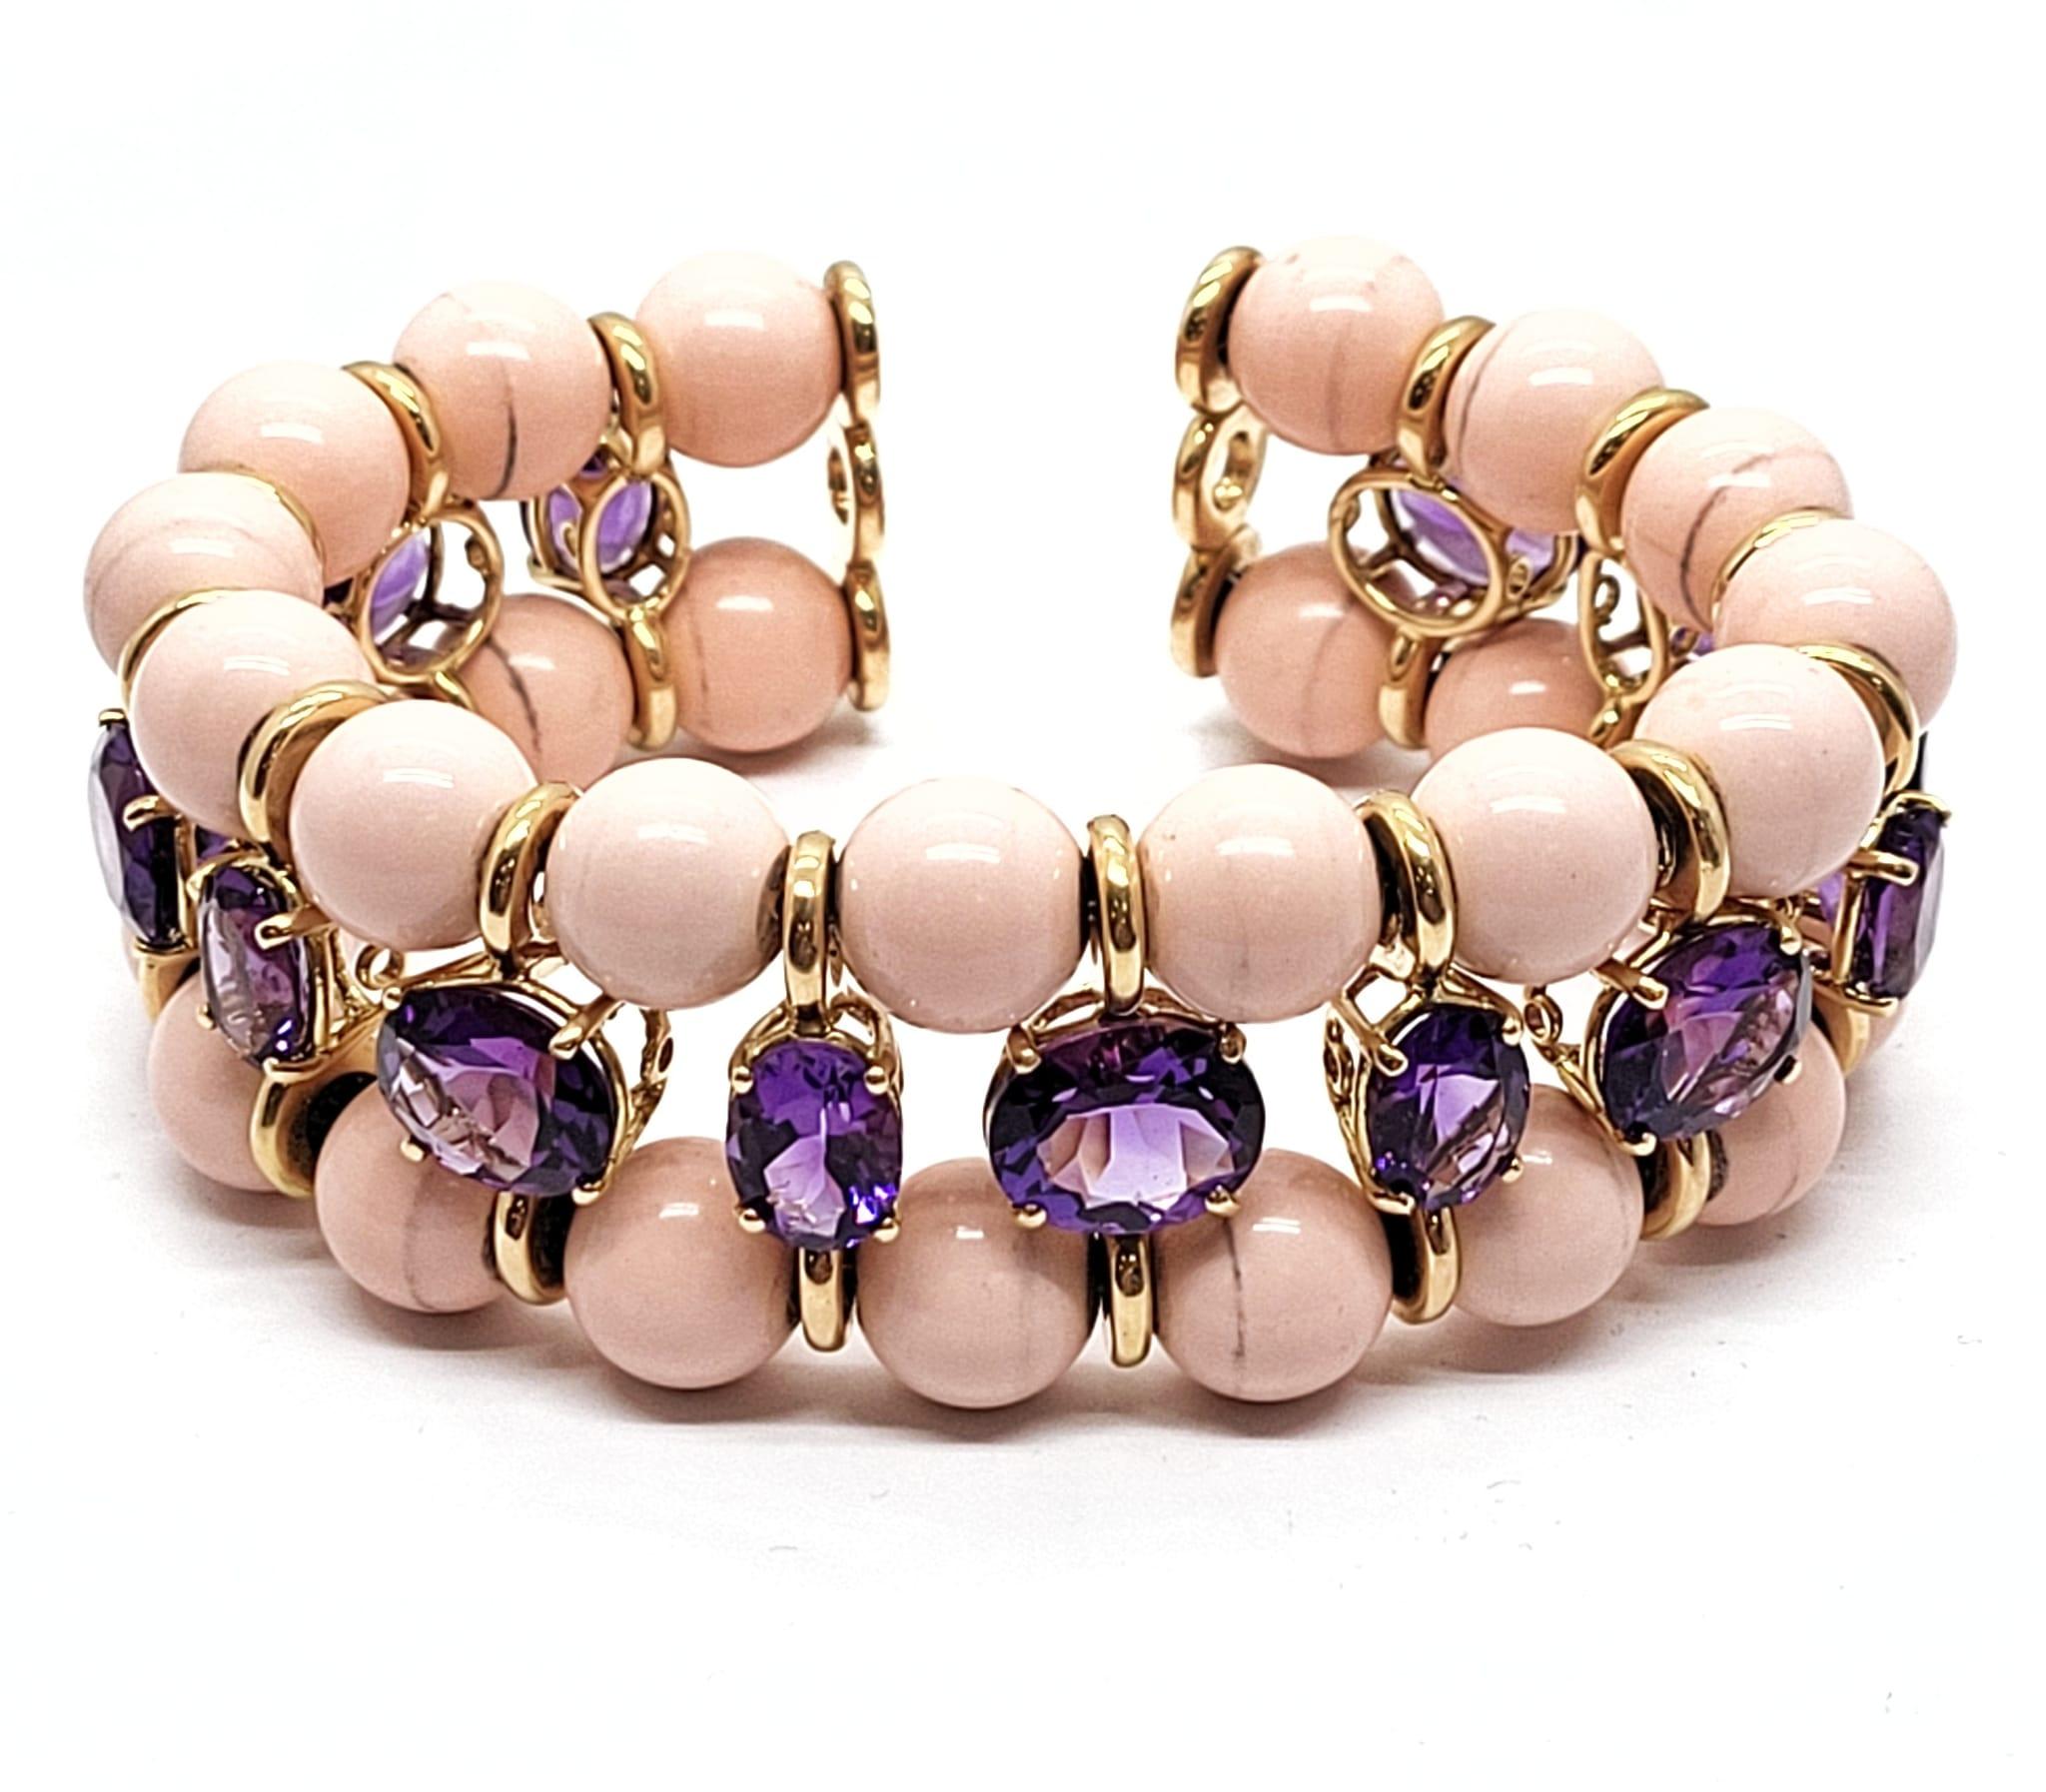 Mixed Cut Andreoli 32.93 Carat Amethyst Coral 18 Karat Yellow Gold Bracelet For Sale